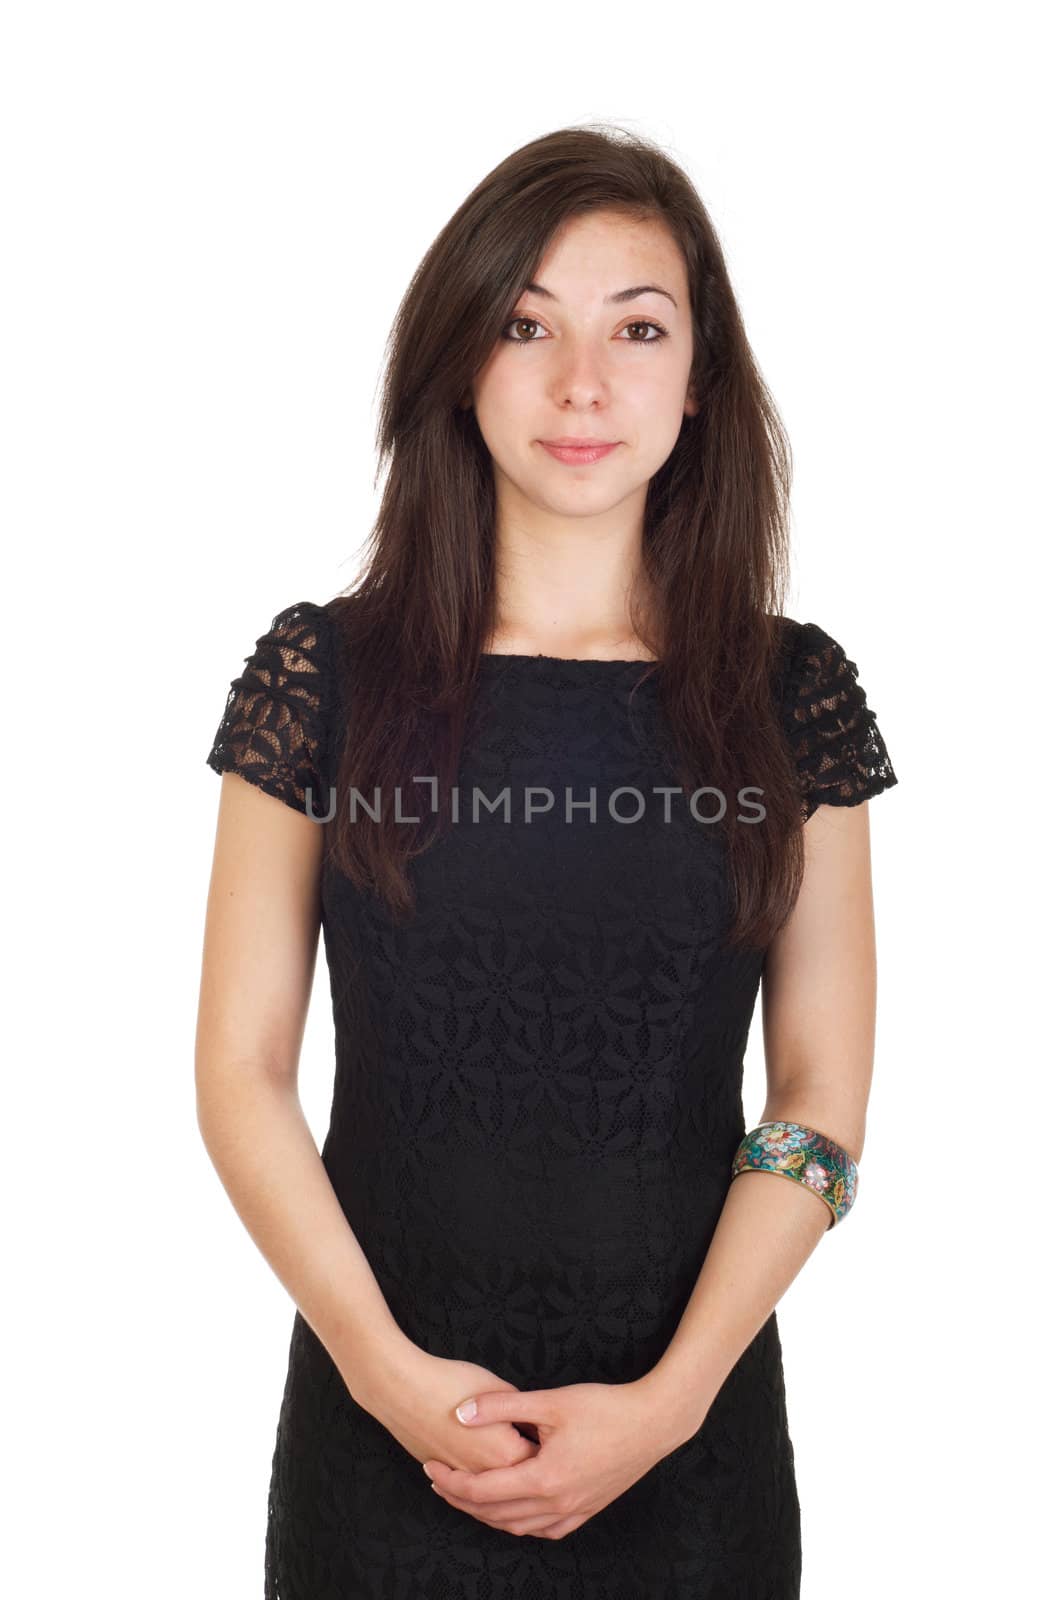 serious 18 years old young woman in black dress ready for night out (isolated on white background)